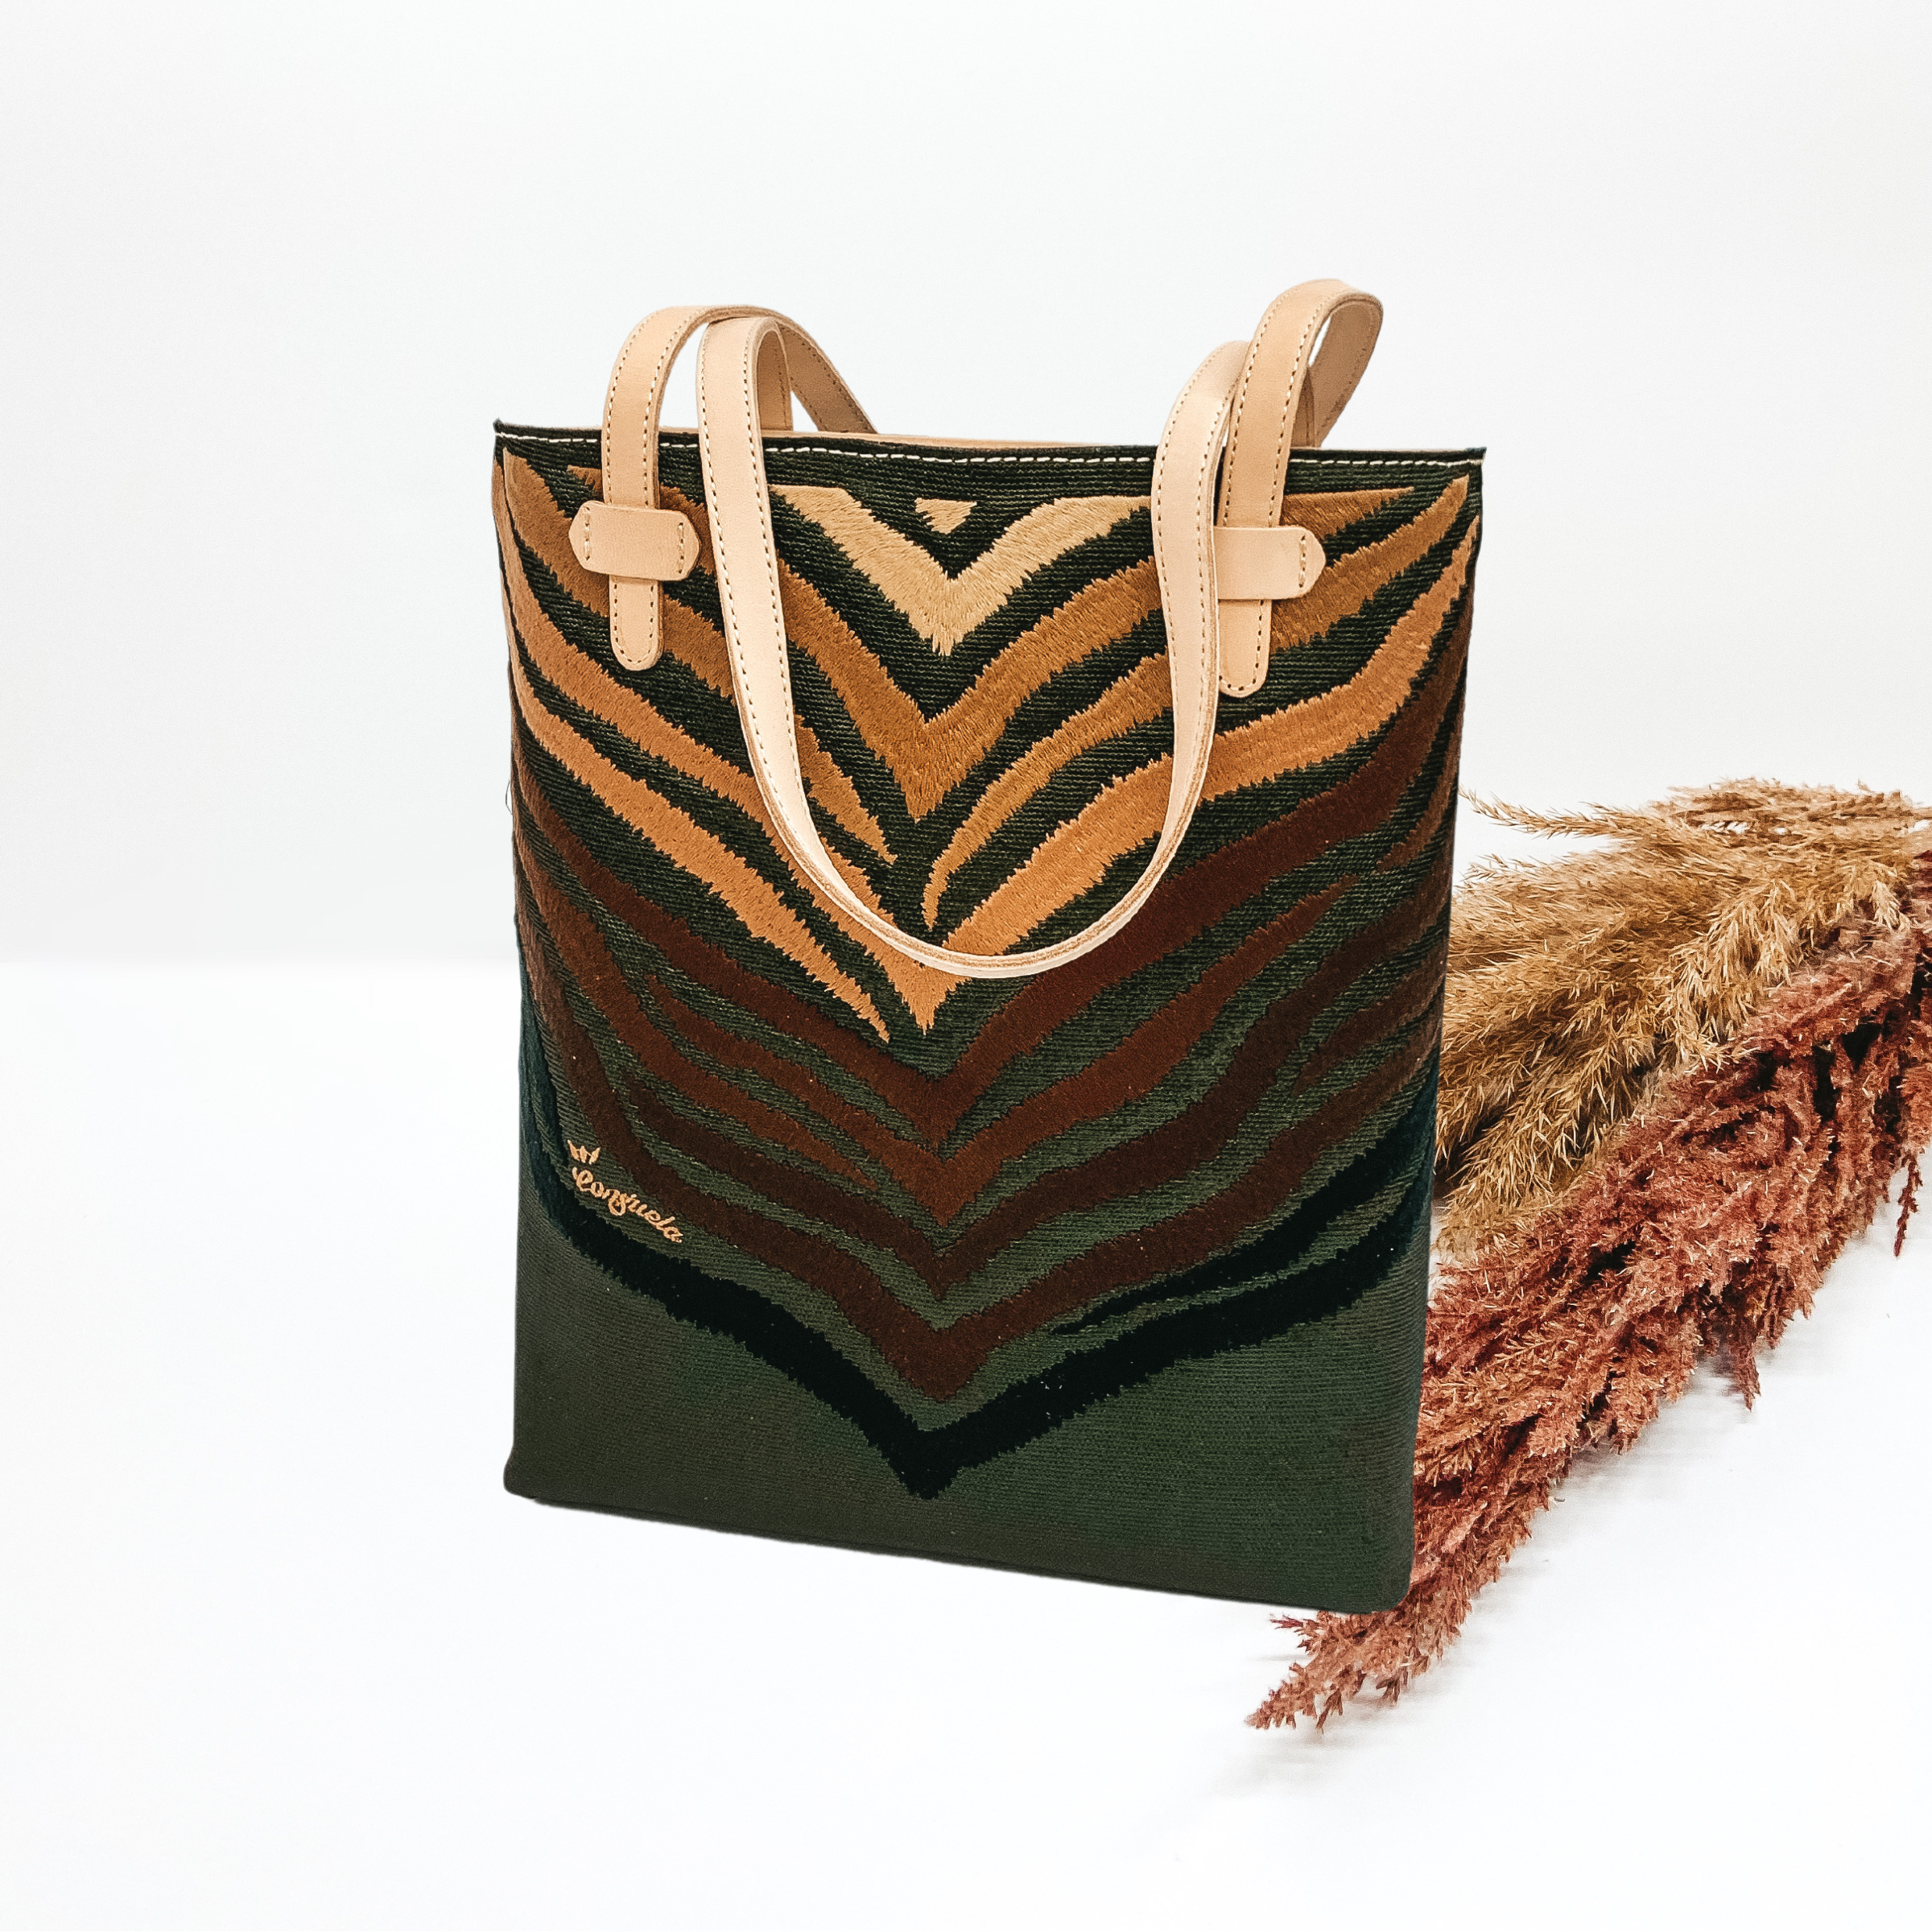 Tall, rectangle, green bag with a embroidered zebra print design. The zebra print goes from beige to black. This bag also has tan leather straps. This purse is pictured on a white background with tan and brown pompous grass in the background.